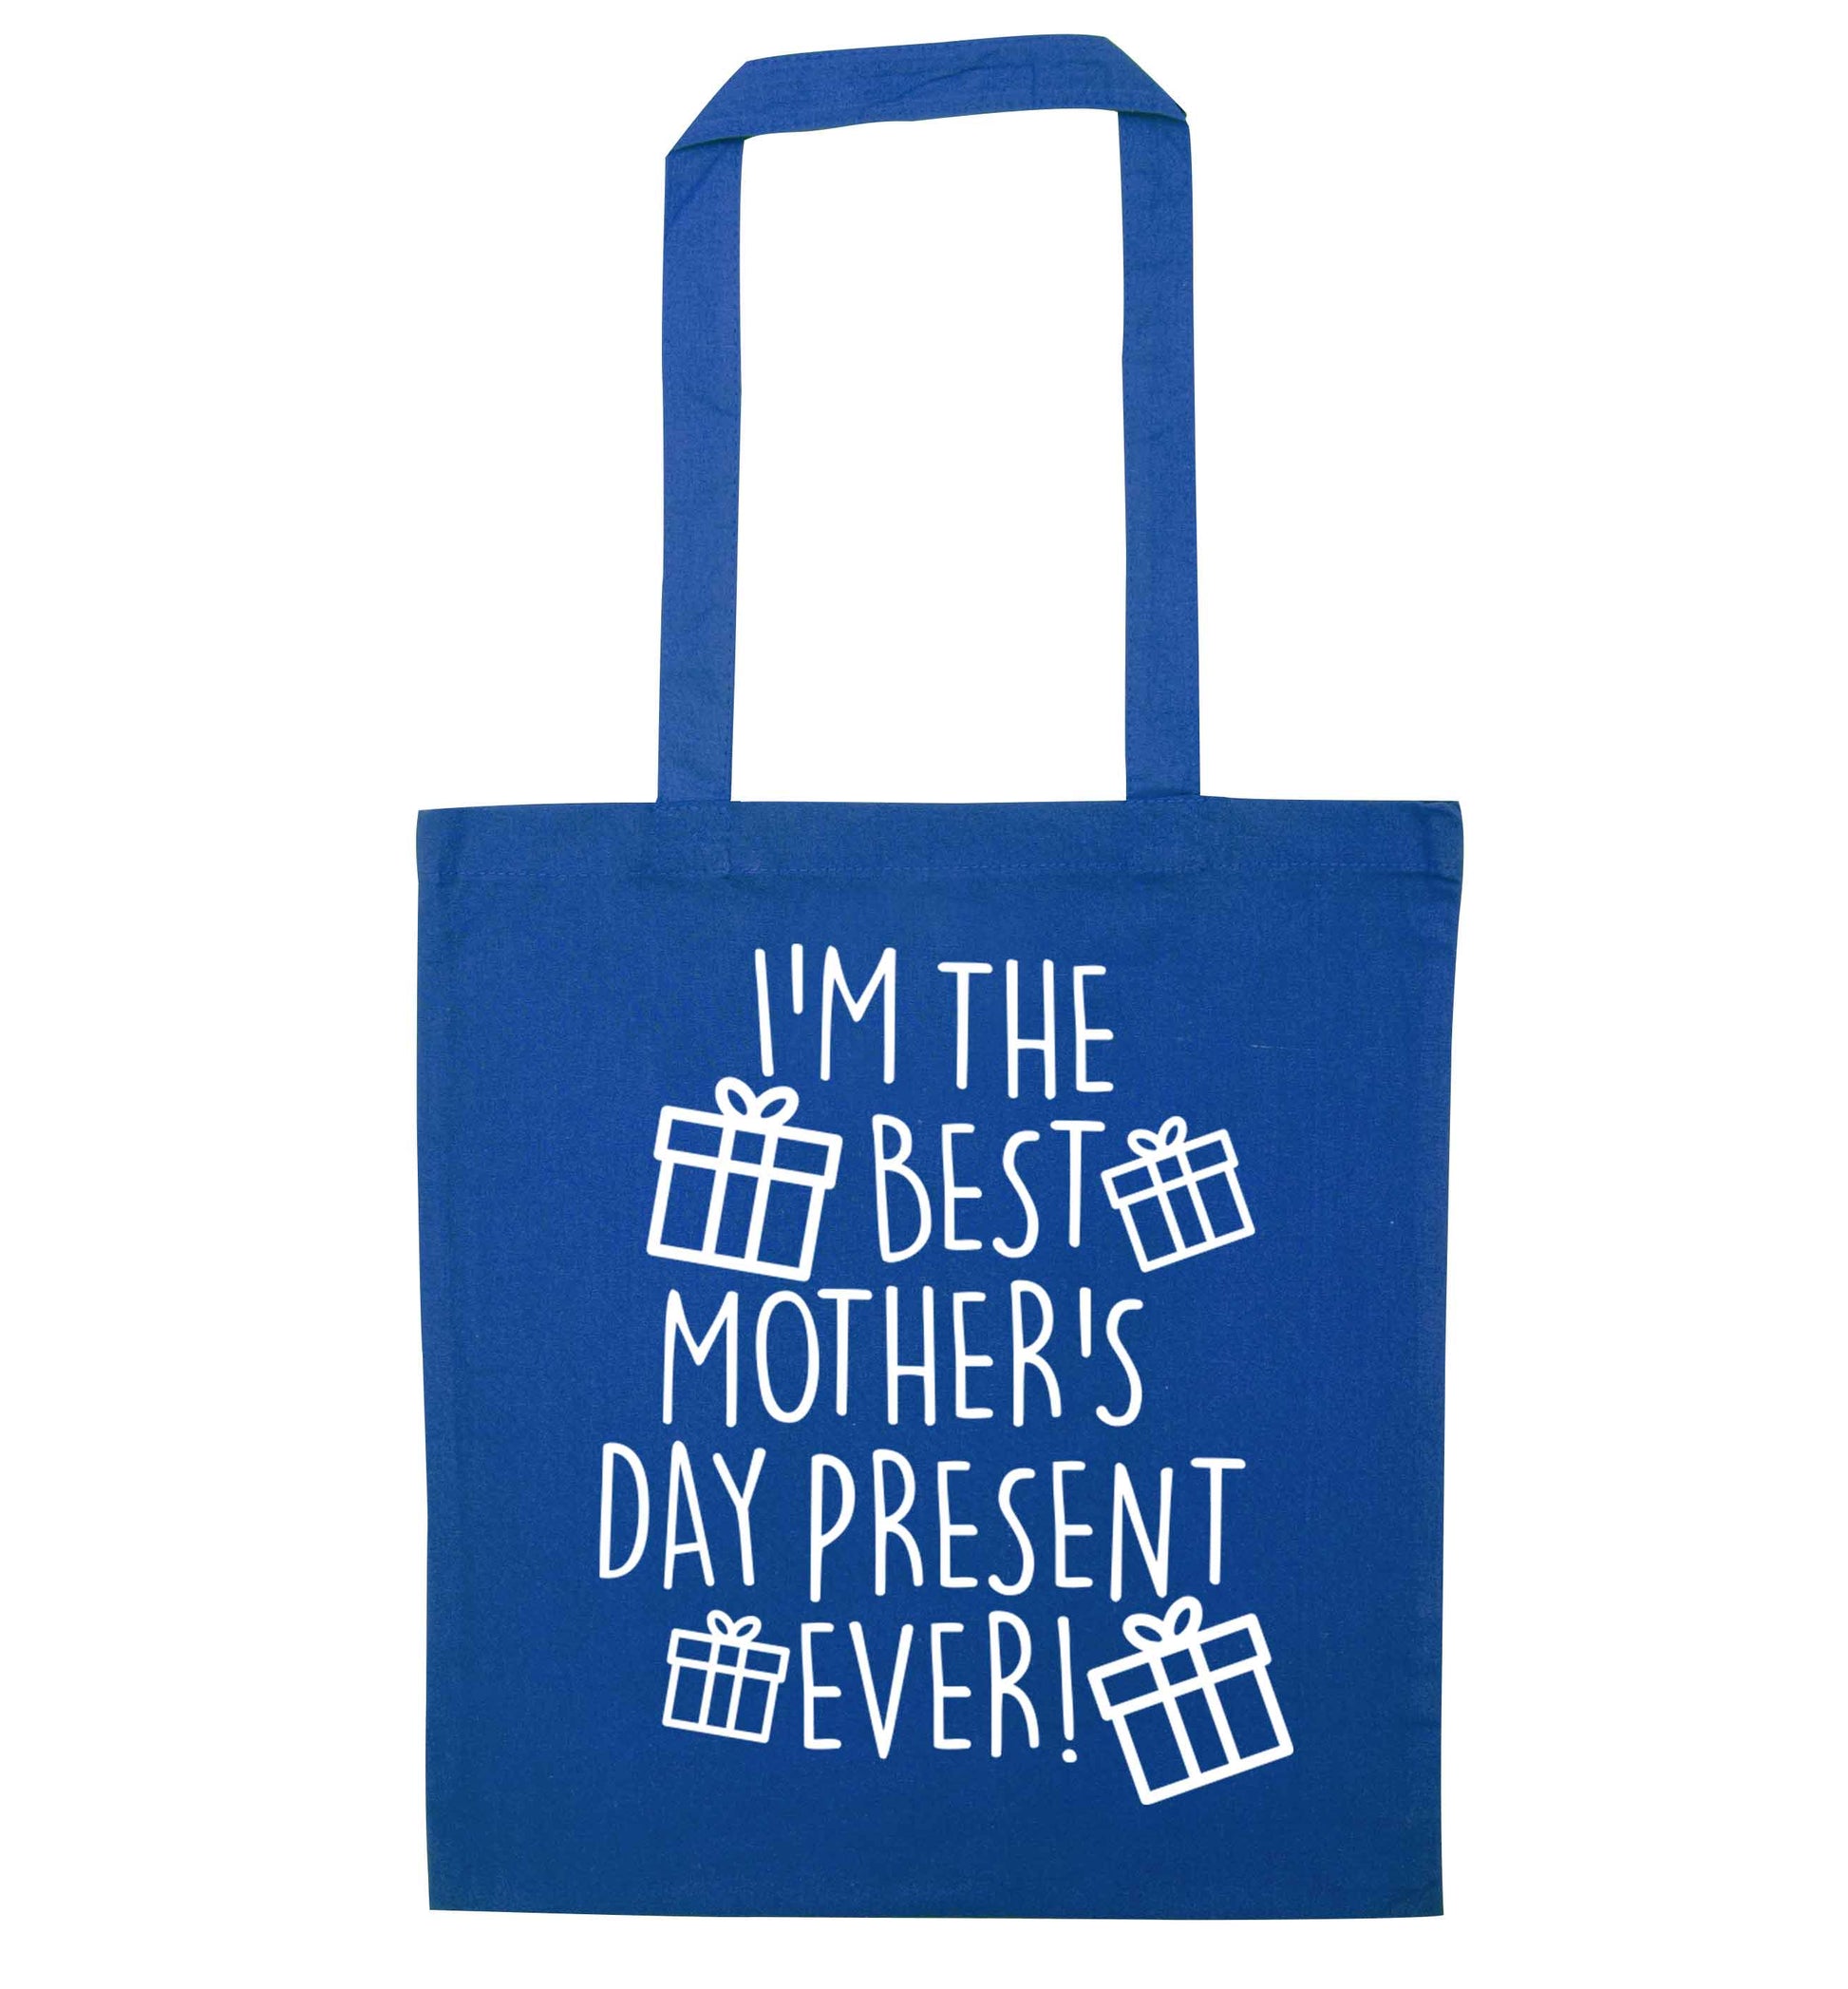 I'm the best mother's day present ever! blue tote bag